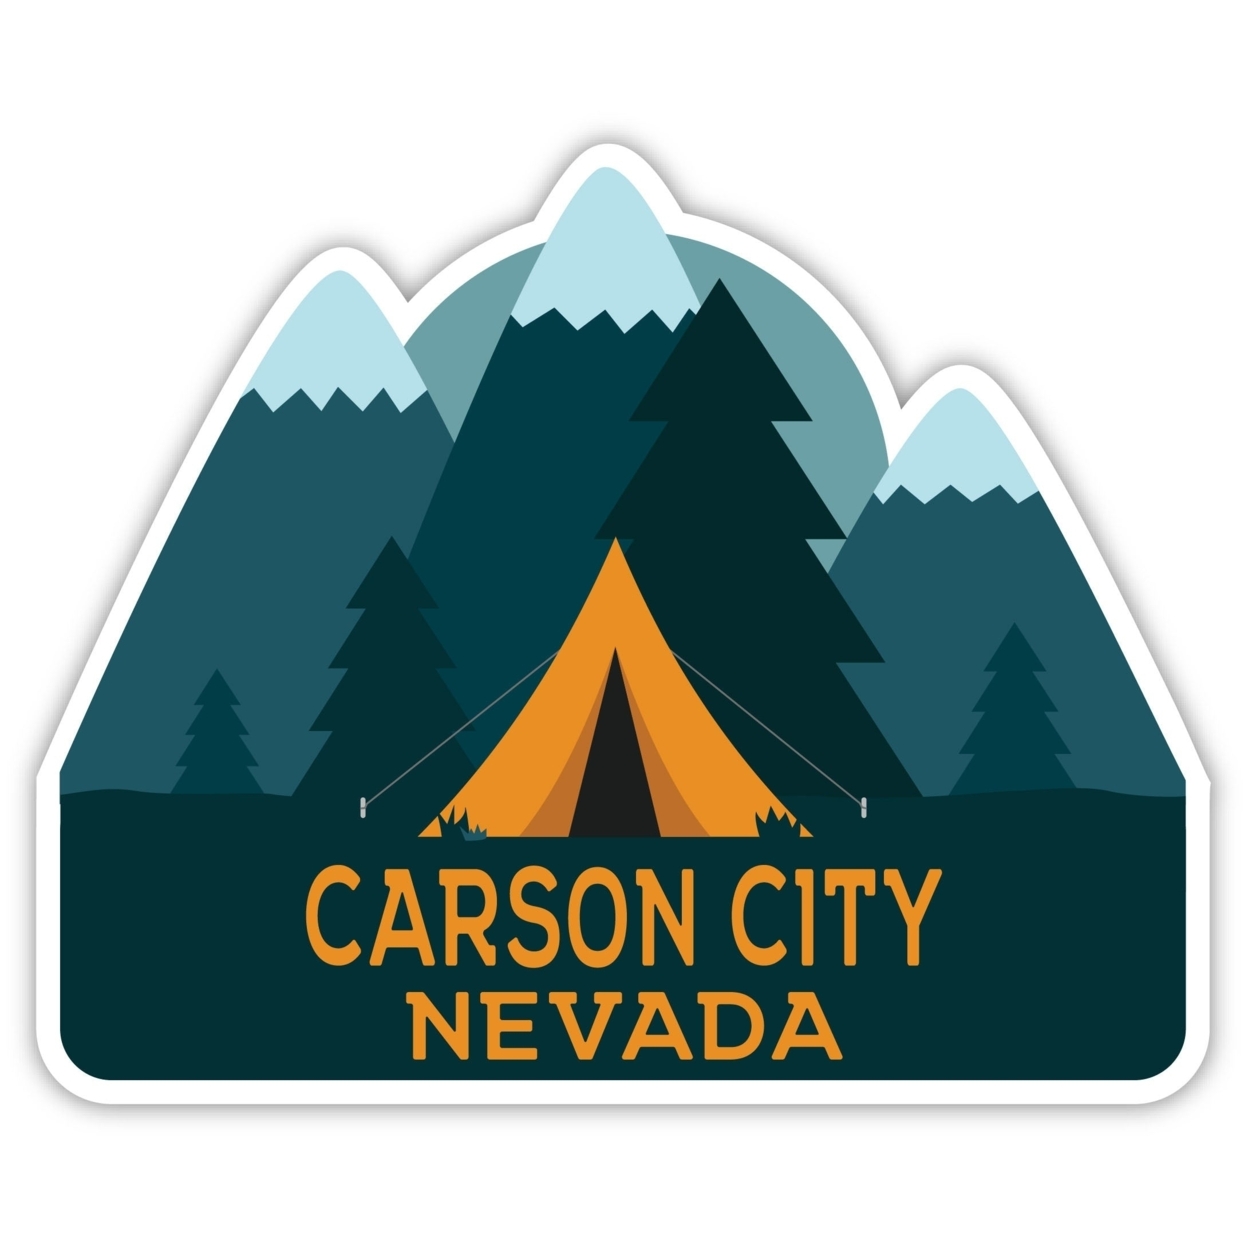 Carson City Nevada Souvenir Decorative Stickers (Choose Theme And Size) - 4-Pack, 10-Inch, Bear